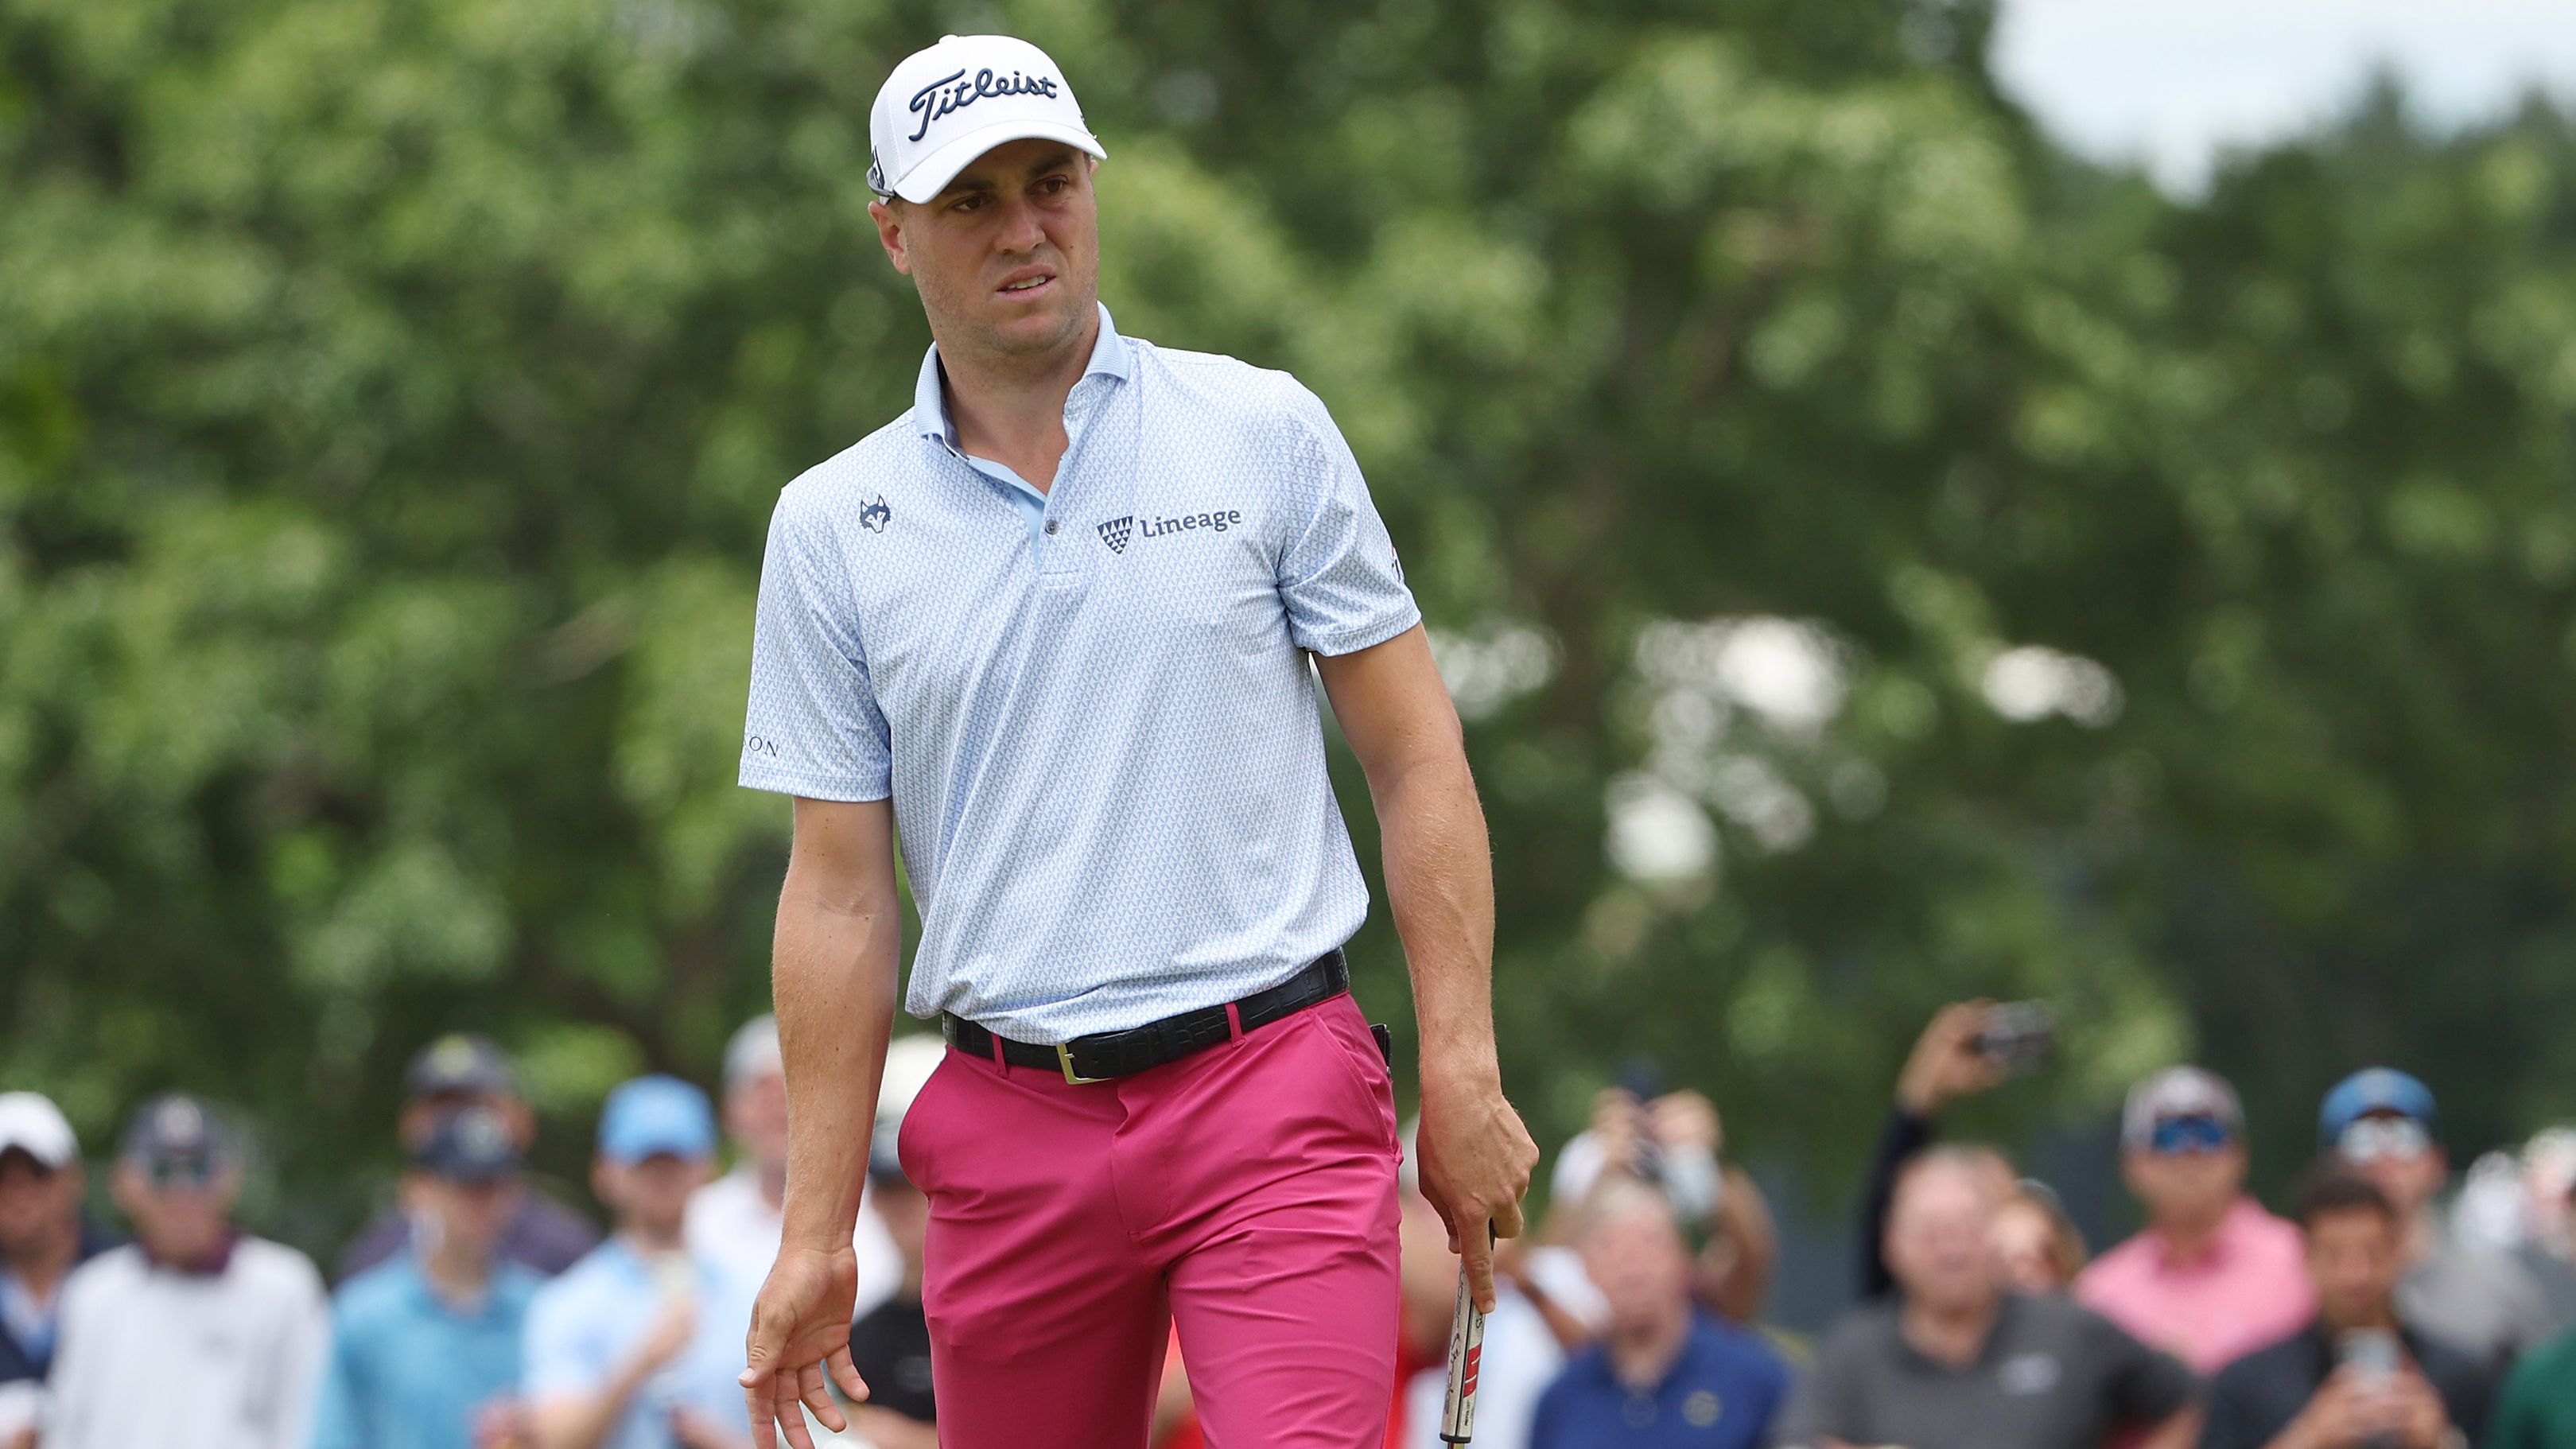 Justin Thomas was among those who struggled in the third round of the US Open.